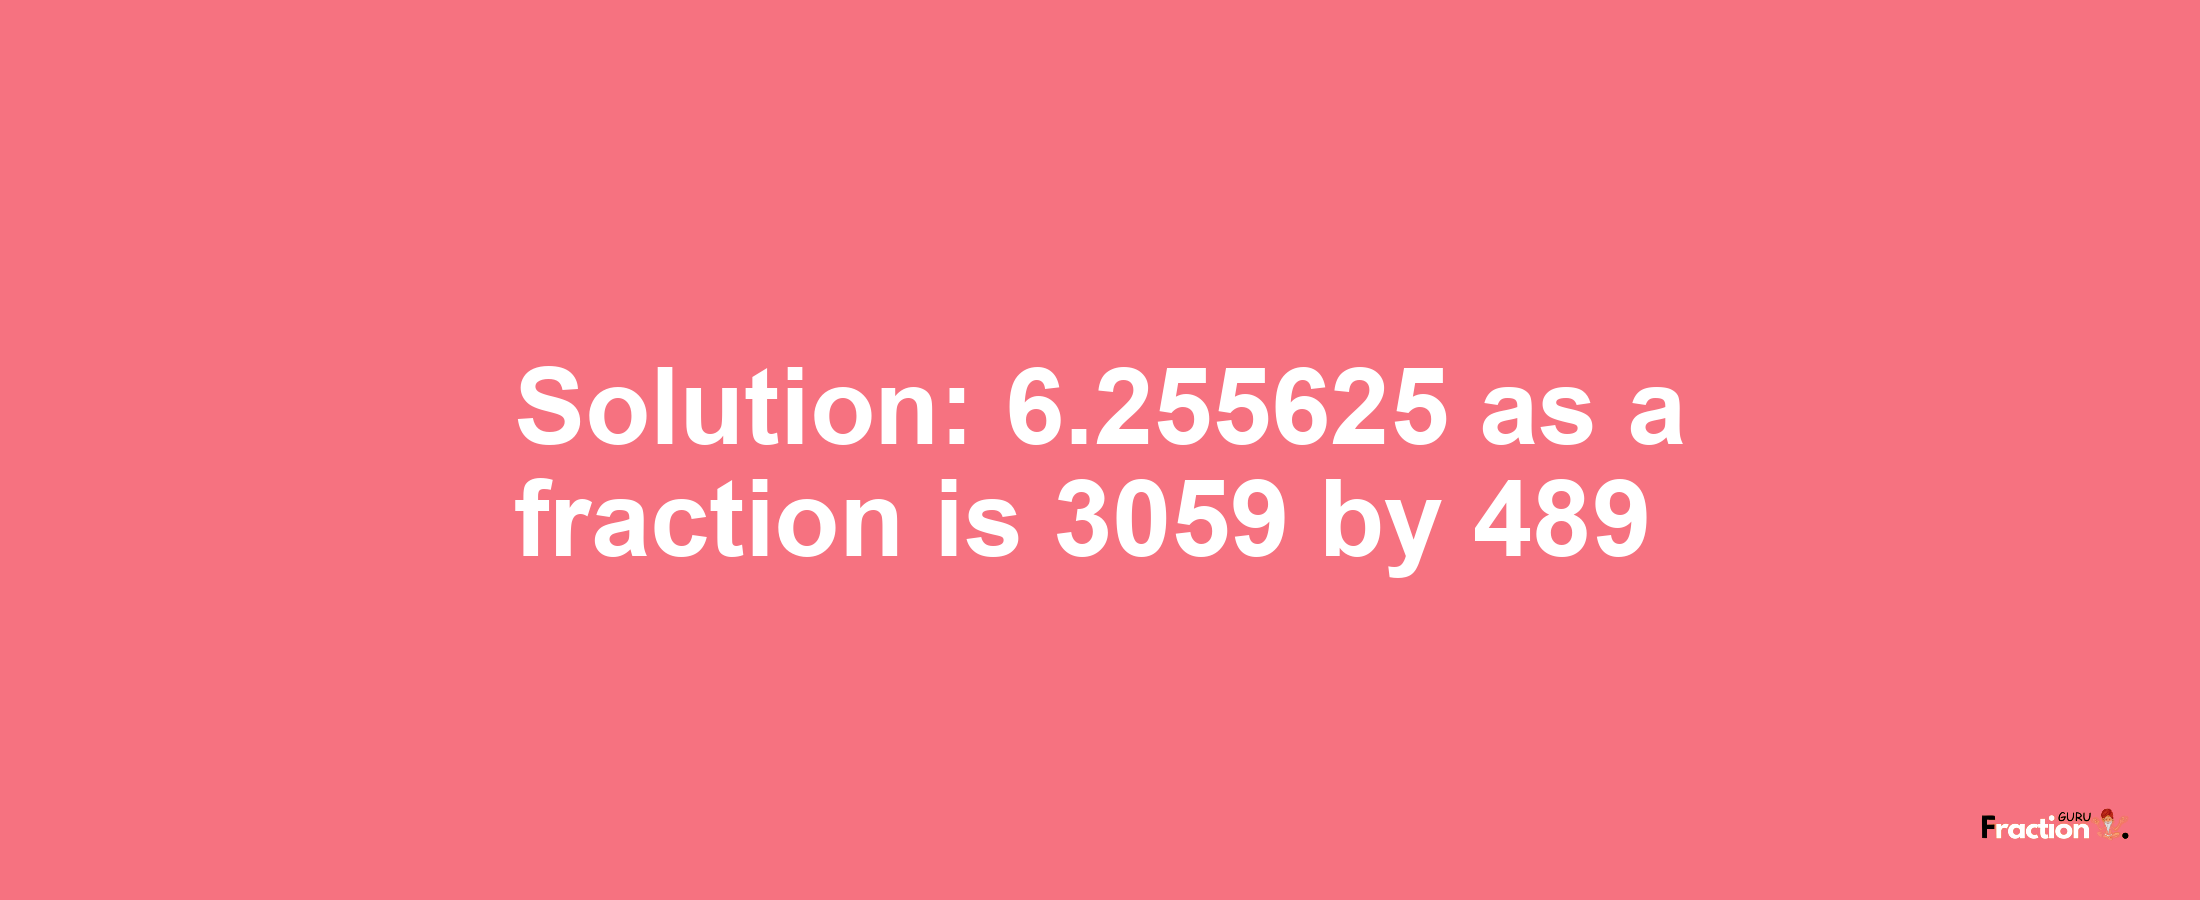 Solution:6.255625 as a fraction is 3059/489